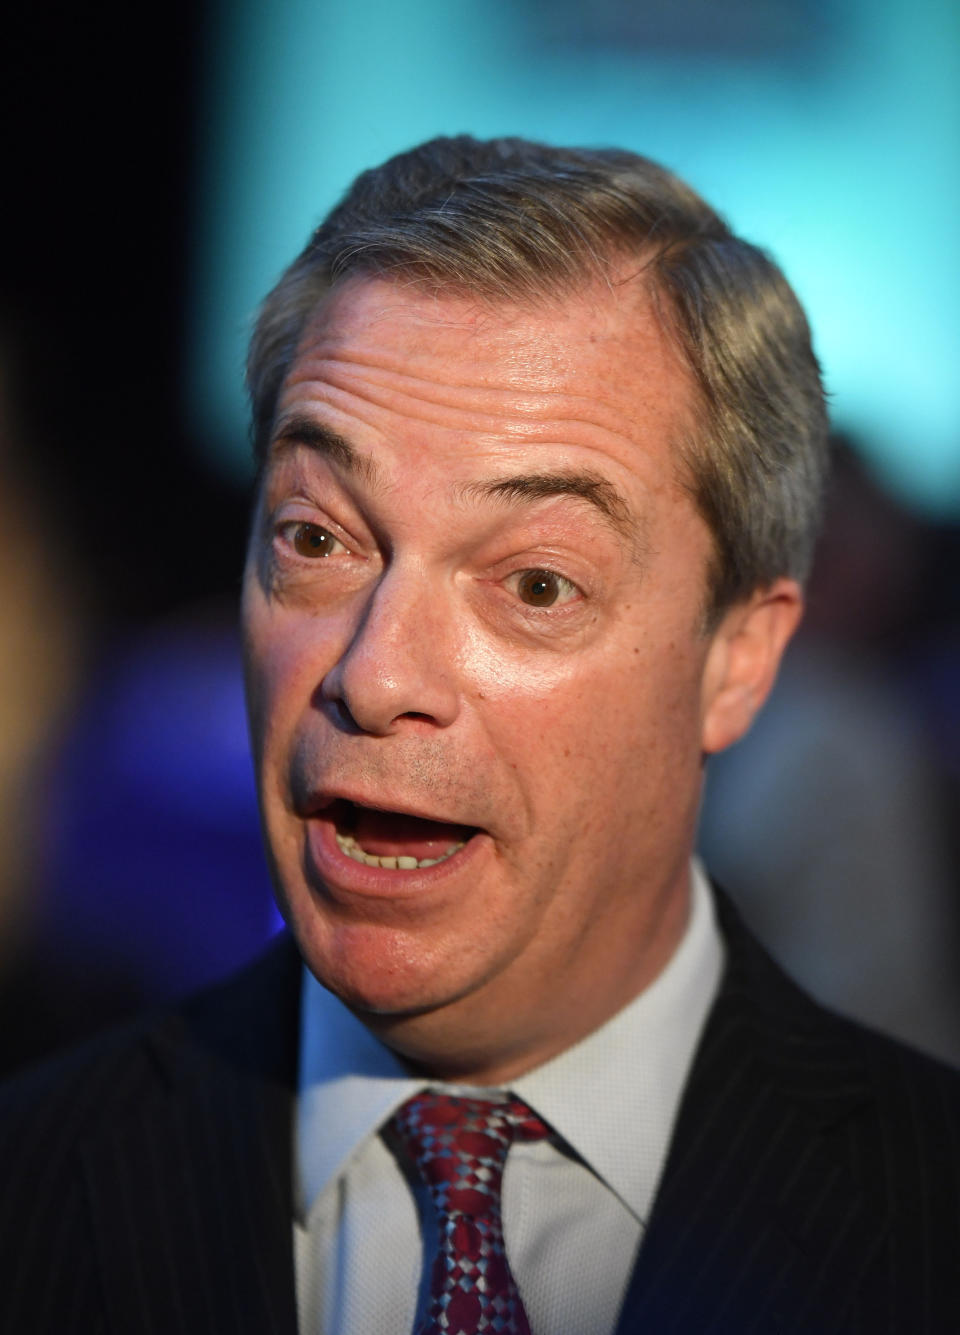 Nigel Farage has thrown his backing behind a controversial US candidate (Picture: PA)